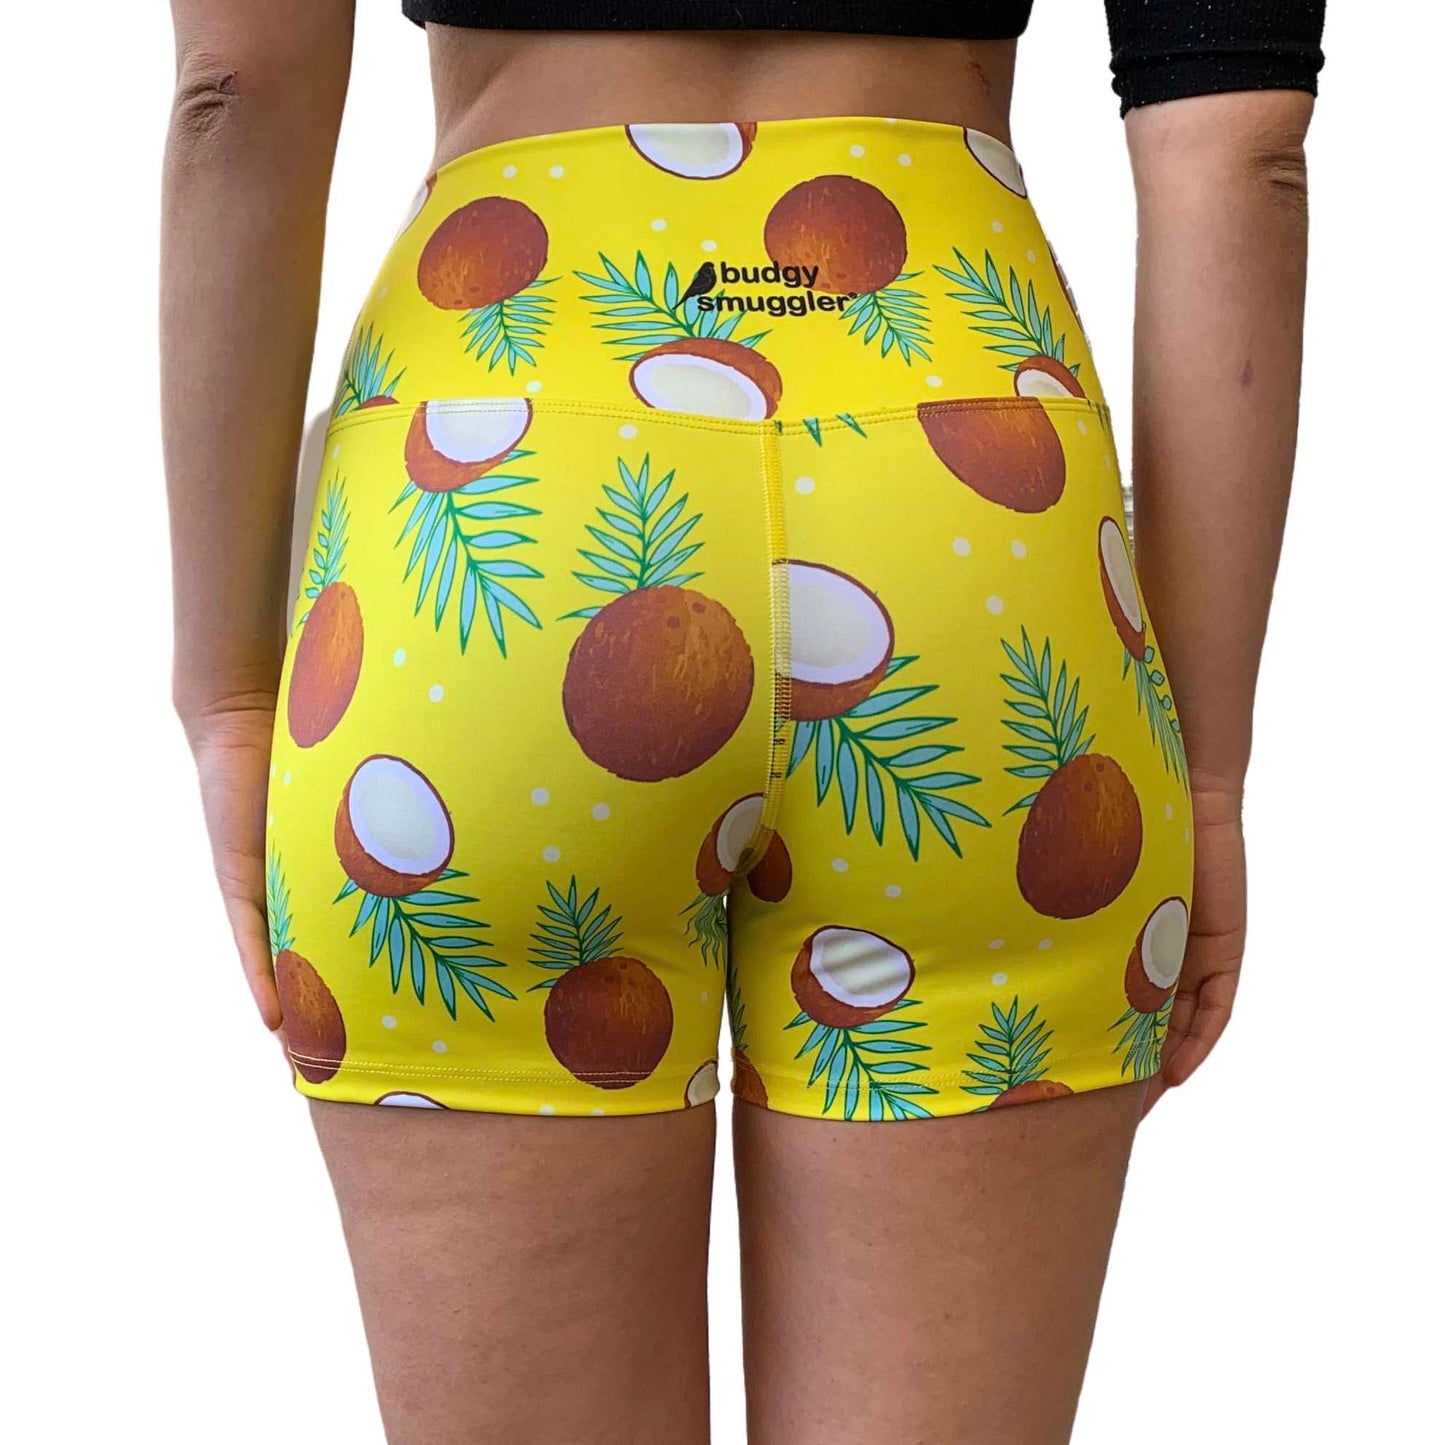 Booty Shorts in Coconut